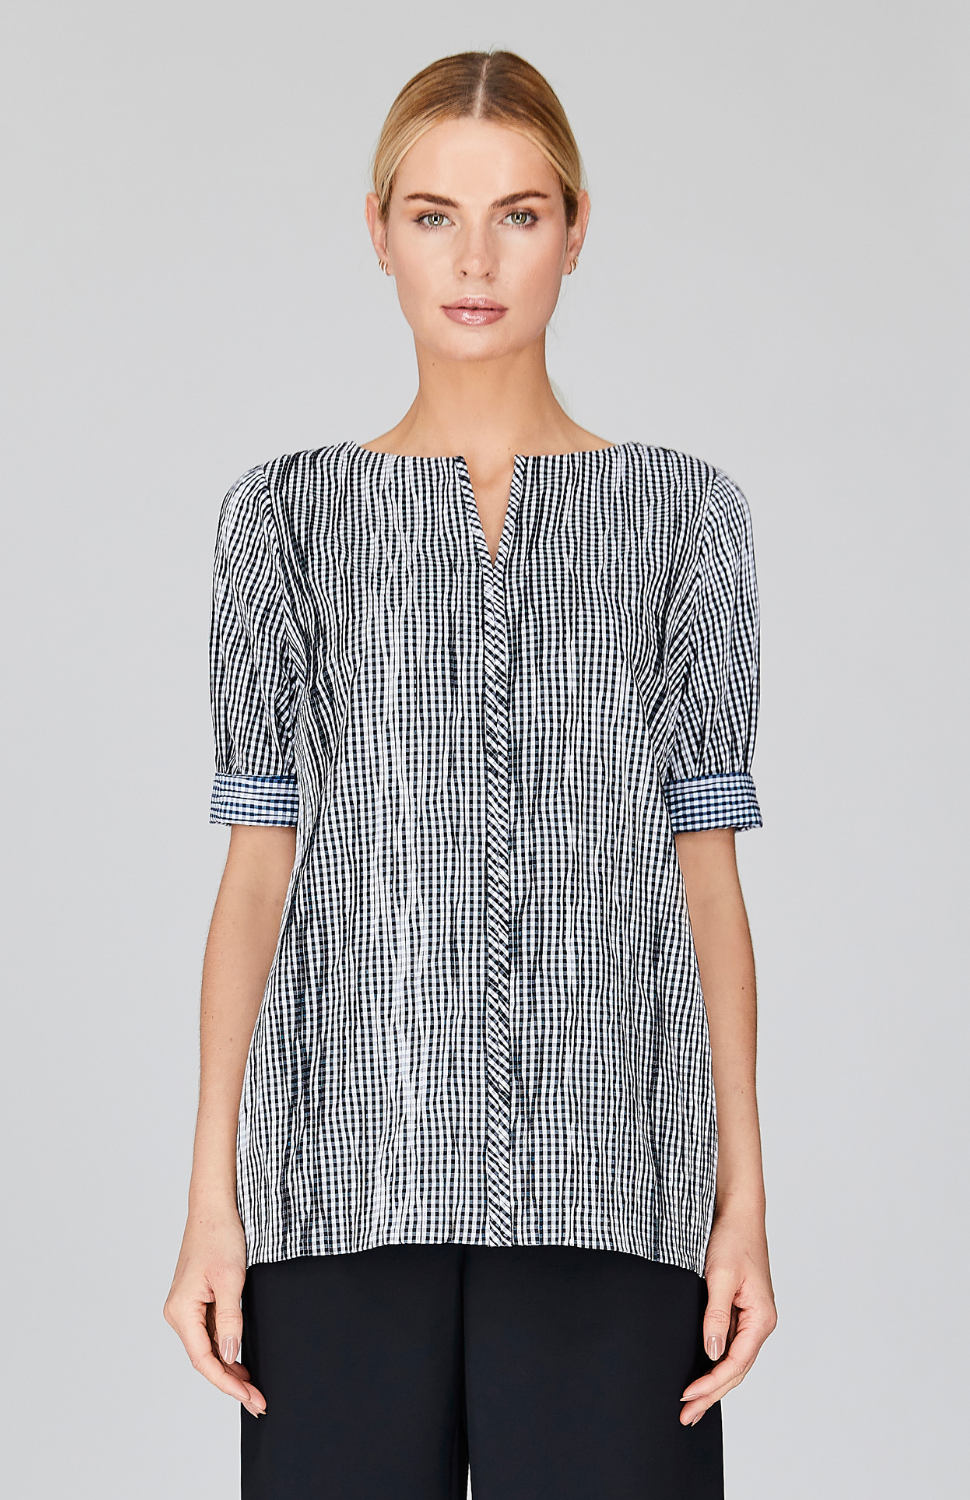 Crinkle Gingham Short Sleeve Tunic with Bias Trim